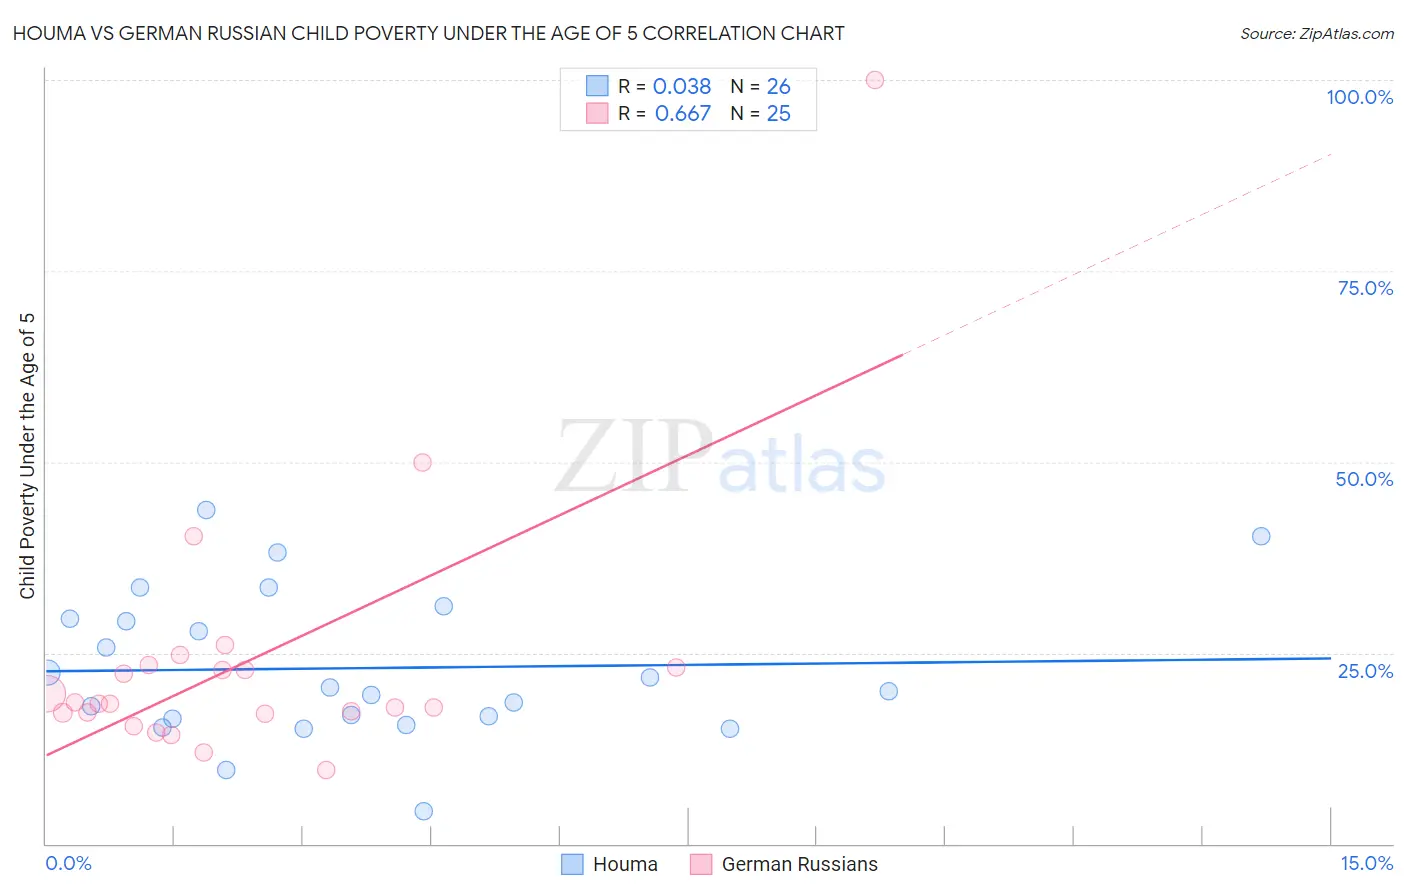 Houma vs German Russian Child Poverty Under the Age of 5